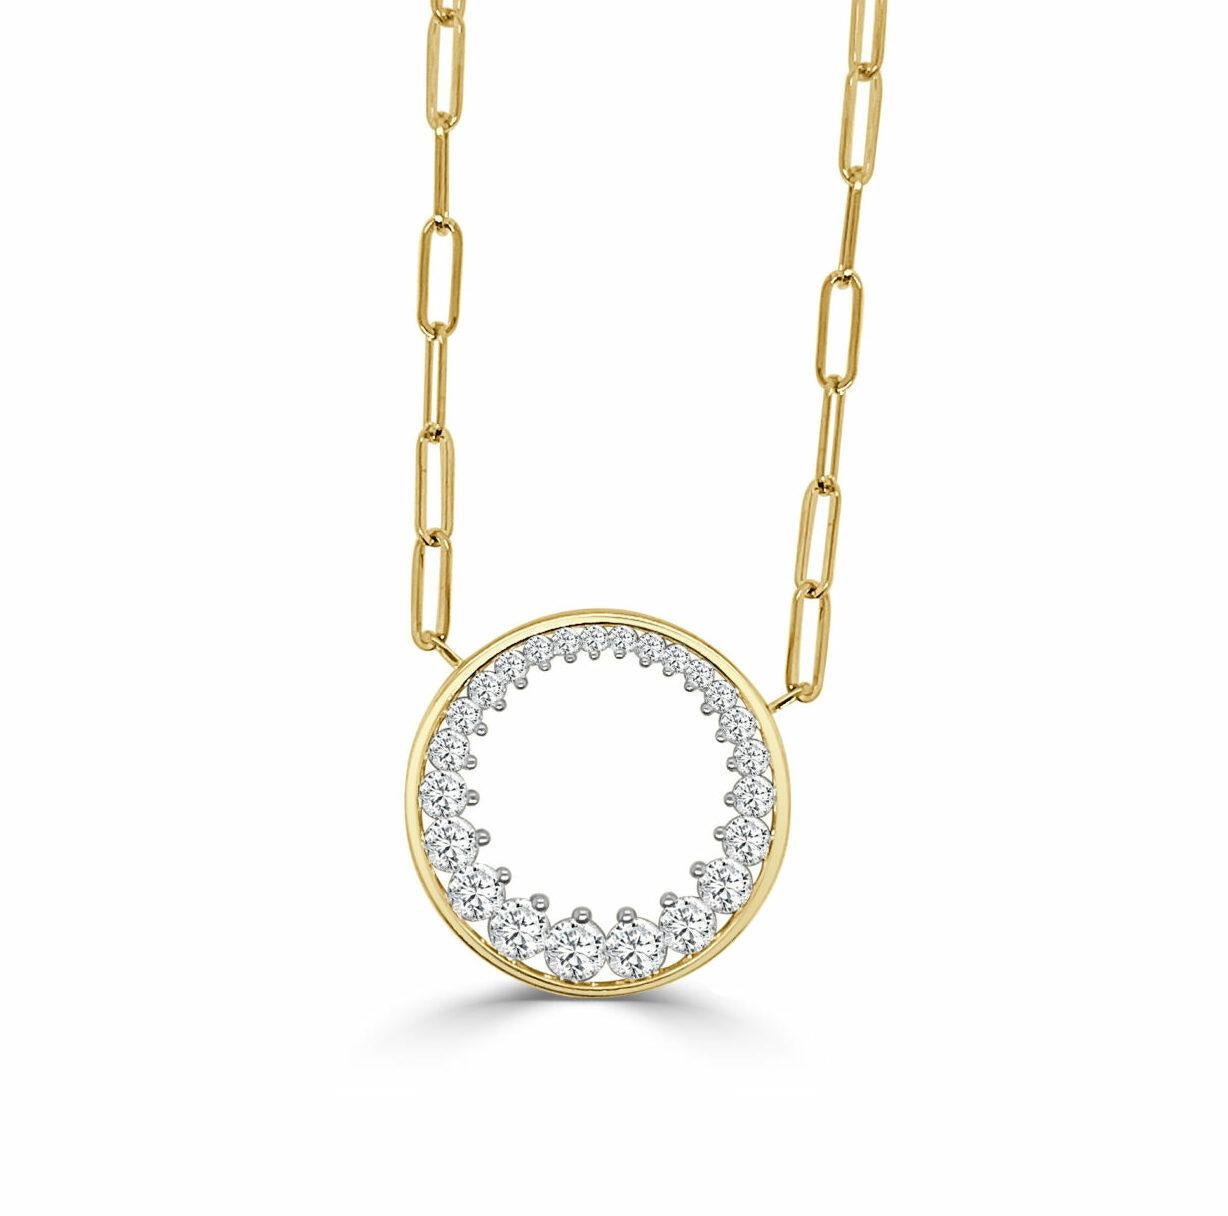 Round Diamond Pendant With Attached Paperclip Chain, 0.97 Ct, (approximately 20 mm diameter)

Available in other metal/ gemstone options: This Diamond pendant can be made in white, pink or yellow gold. 
Matching earrings, bangle and ring available